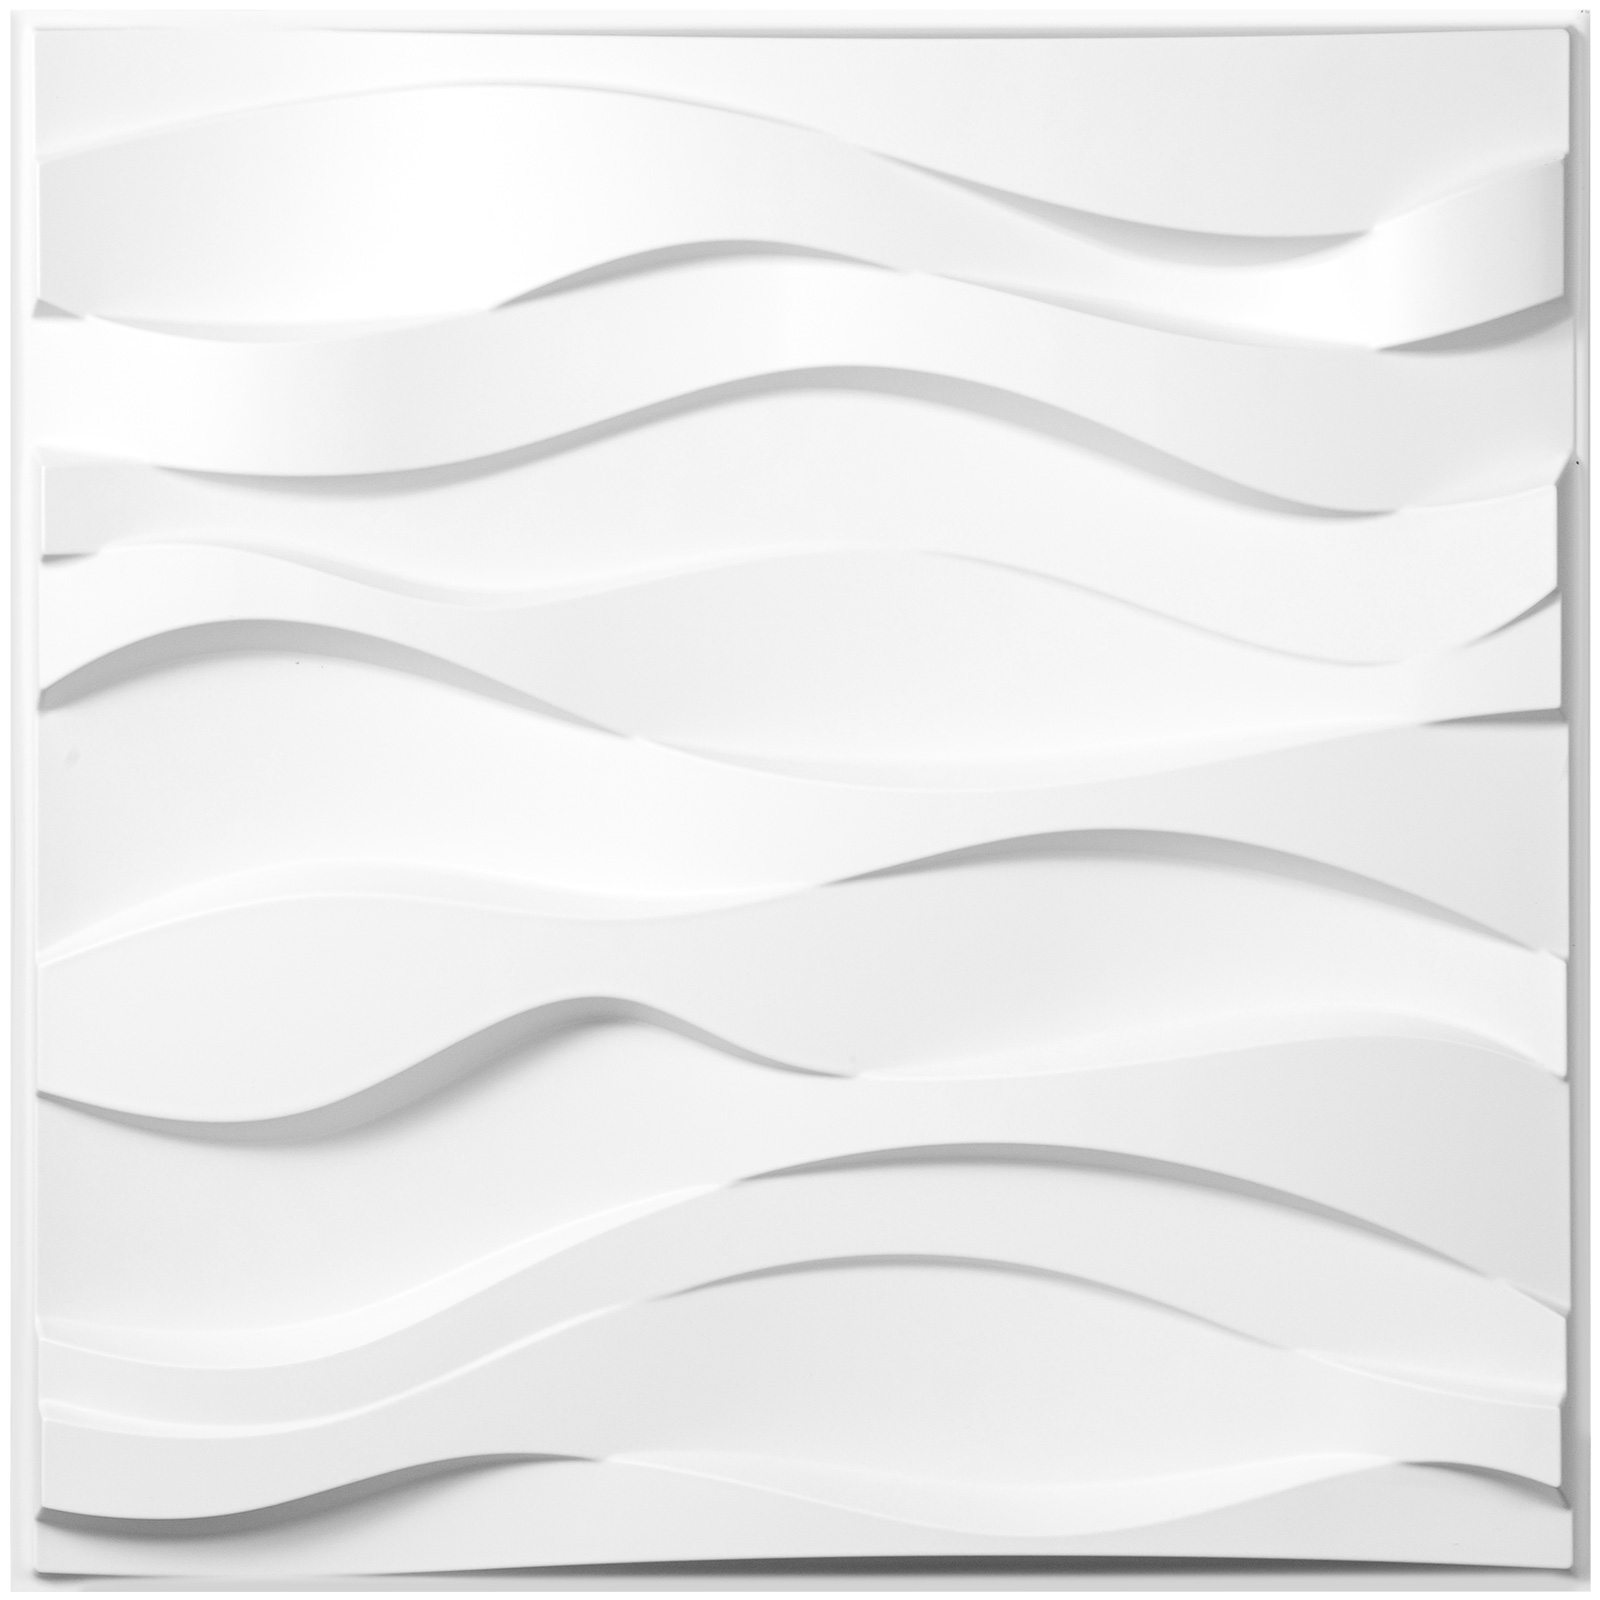 VEVOR 3D Wall Panels 13 Pack Wall Panels PVC Decorative Wall Panels for 32 sqft Area Wall Panels for Interior Wall Decor Big Wave Style 3D Wall Tiles White 3D Wall Art Paintable Modern Wall Panel - image 1 of 9